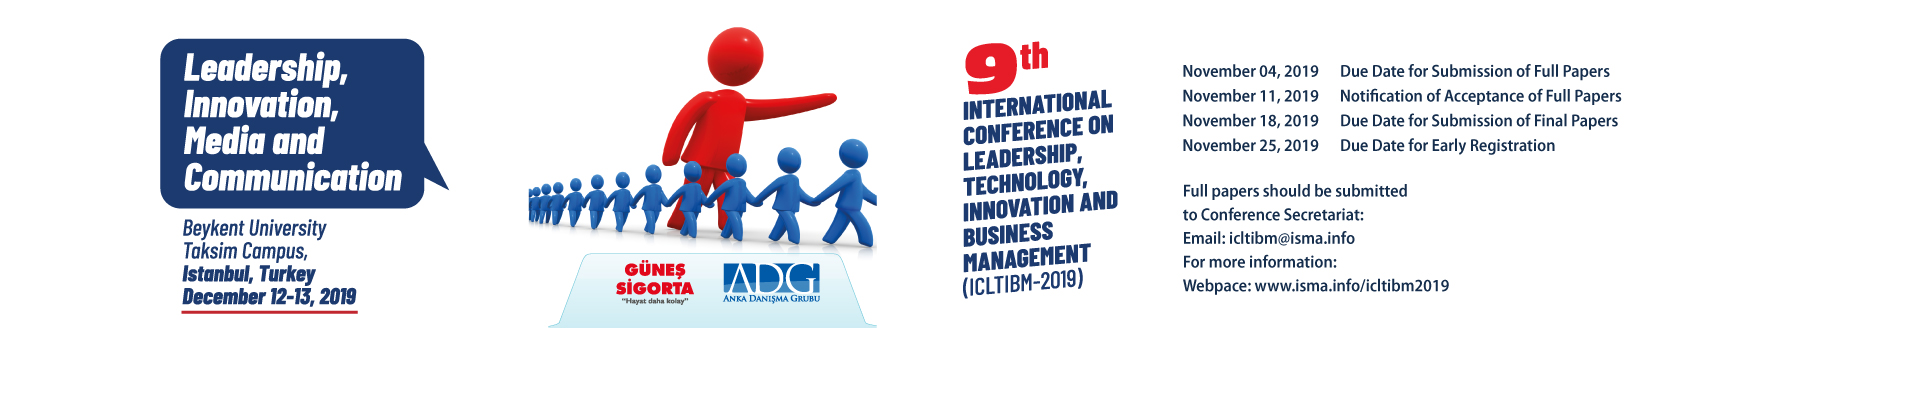 9th International Conference on Leadership, Technology, Innovation and Business Management 2019 (ICLTIBM-2019)